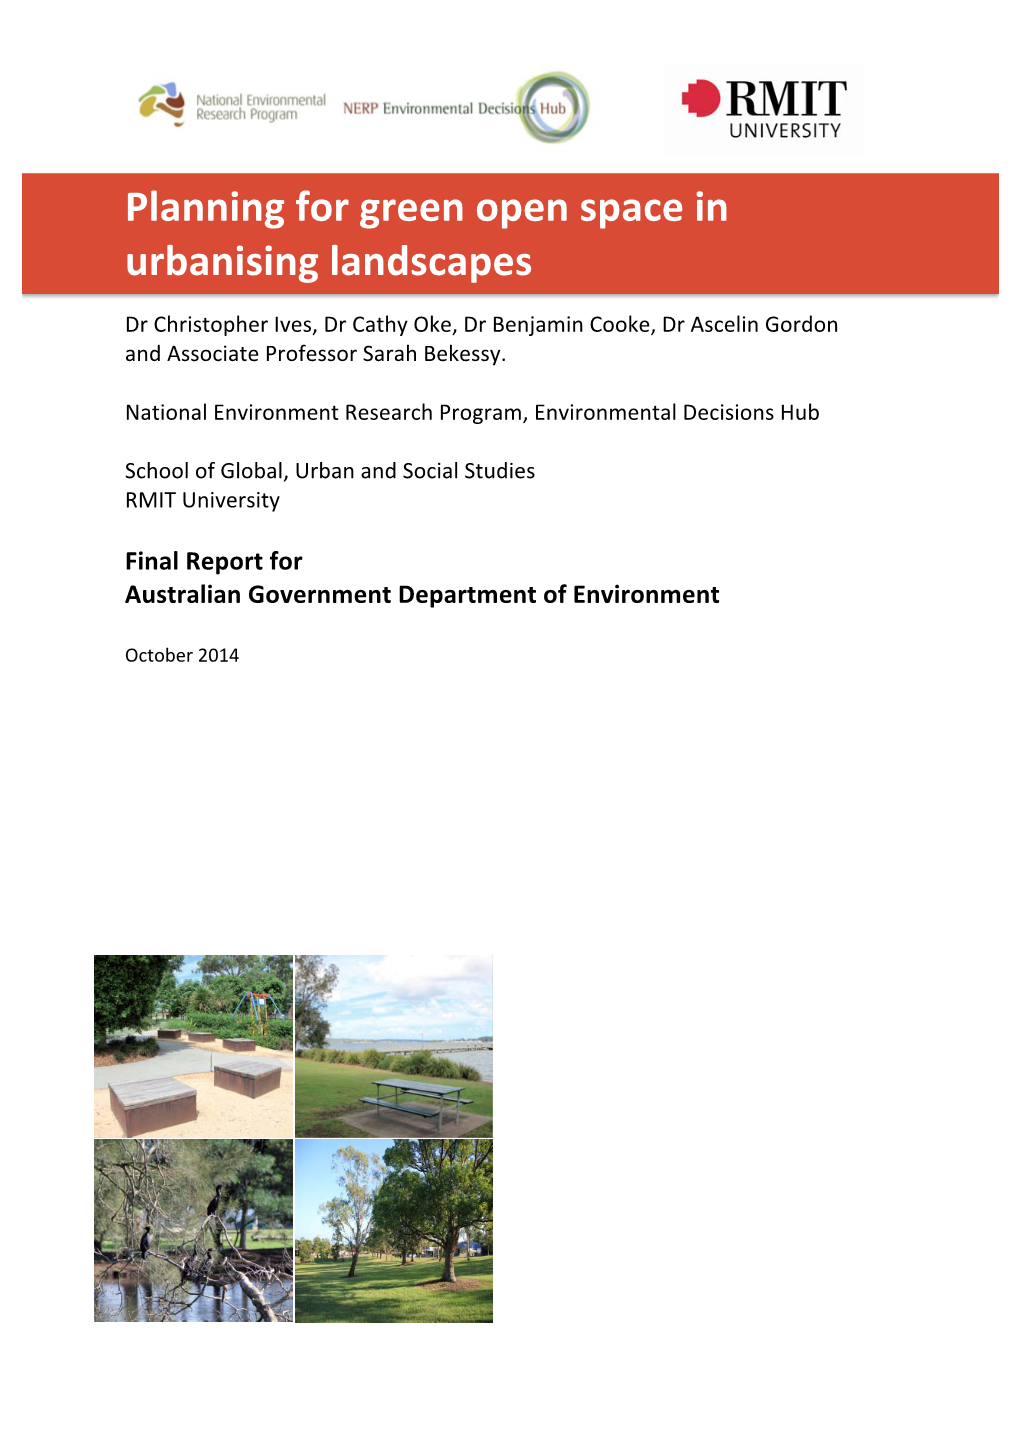 Planning for Green Open Space in Urbanising Landscapes